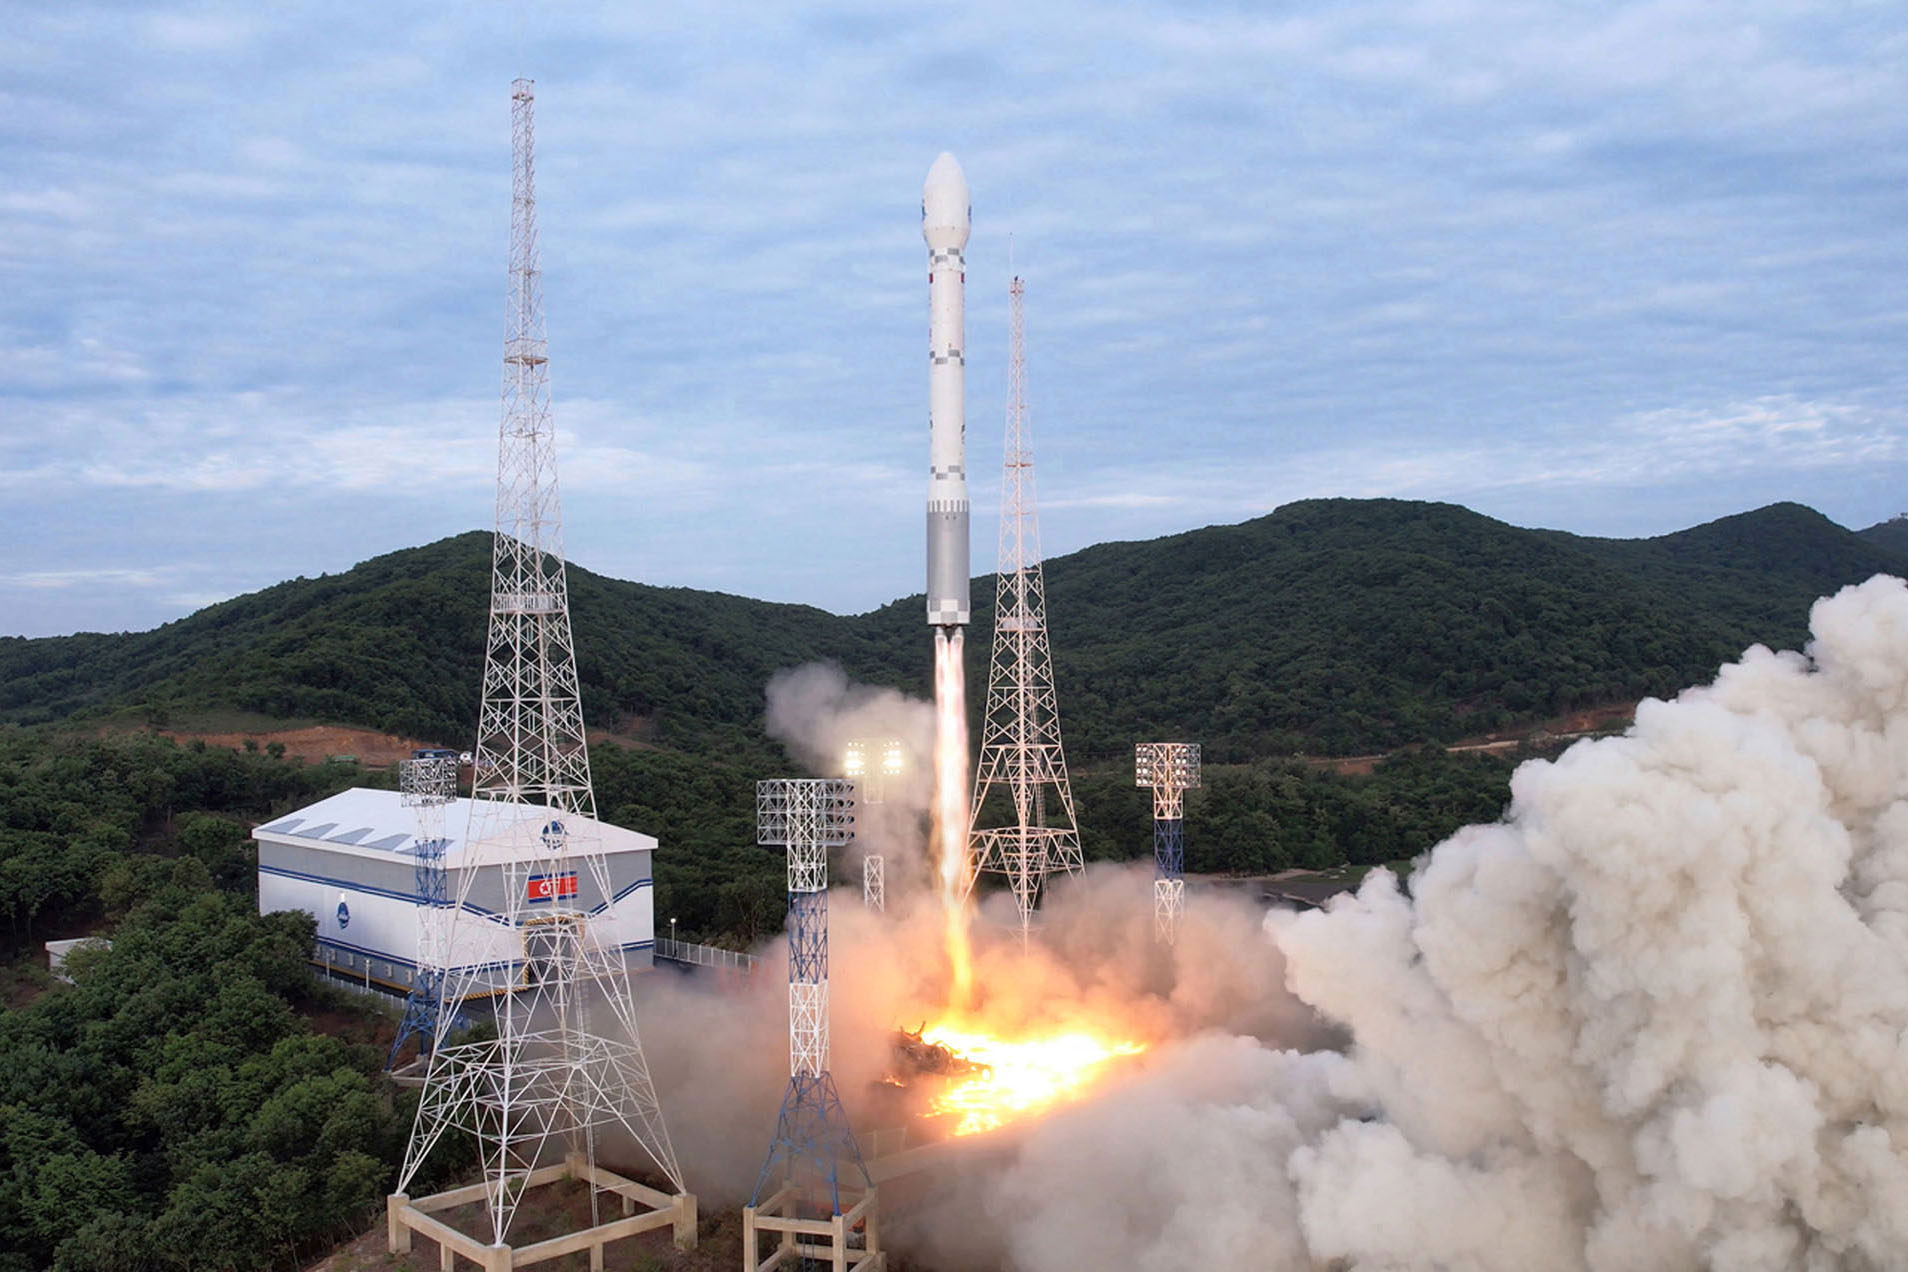 North Korea calls failed spy satellite launch 'the most serious' shortcoming,  vows 2nd launch | South China Morning Post